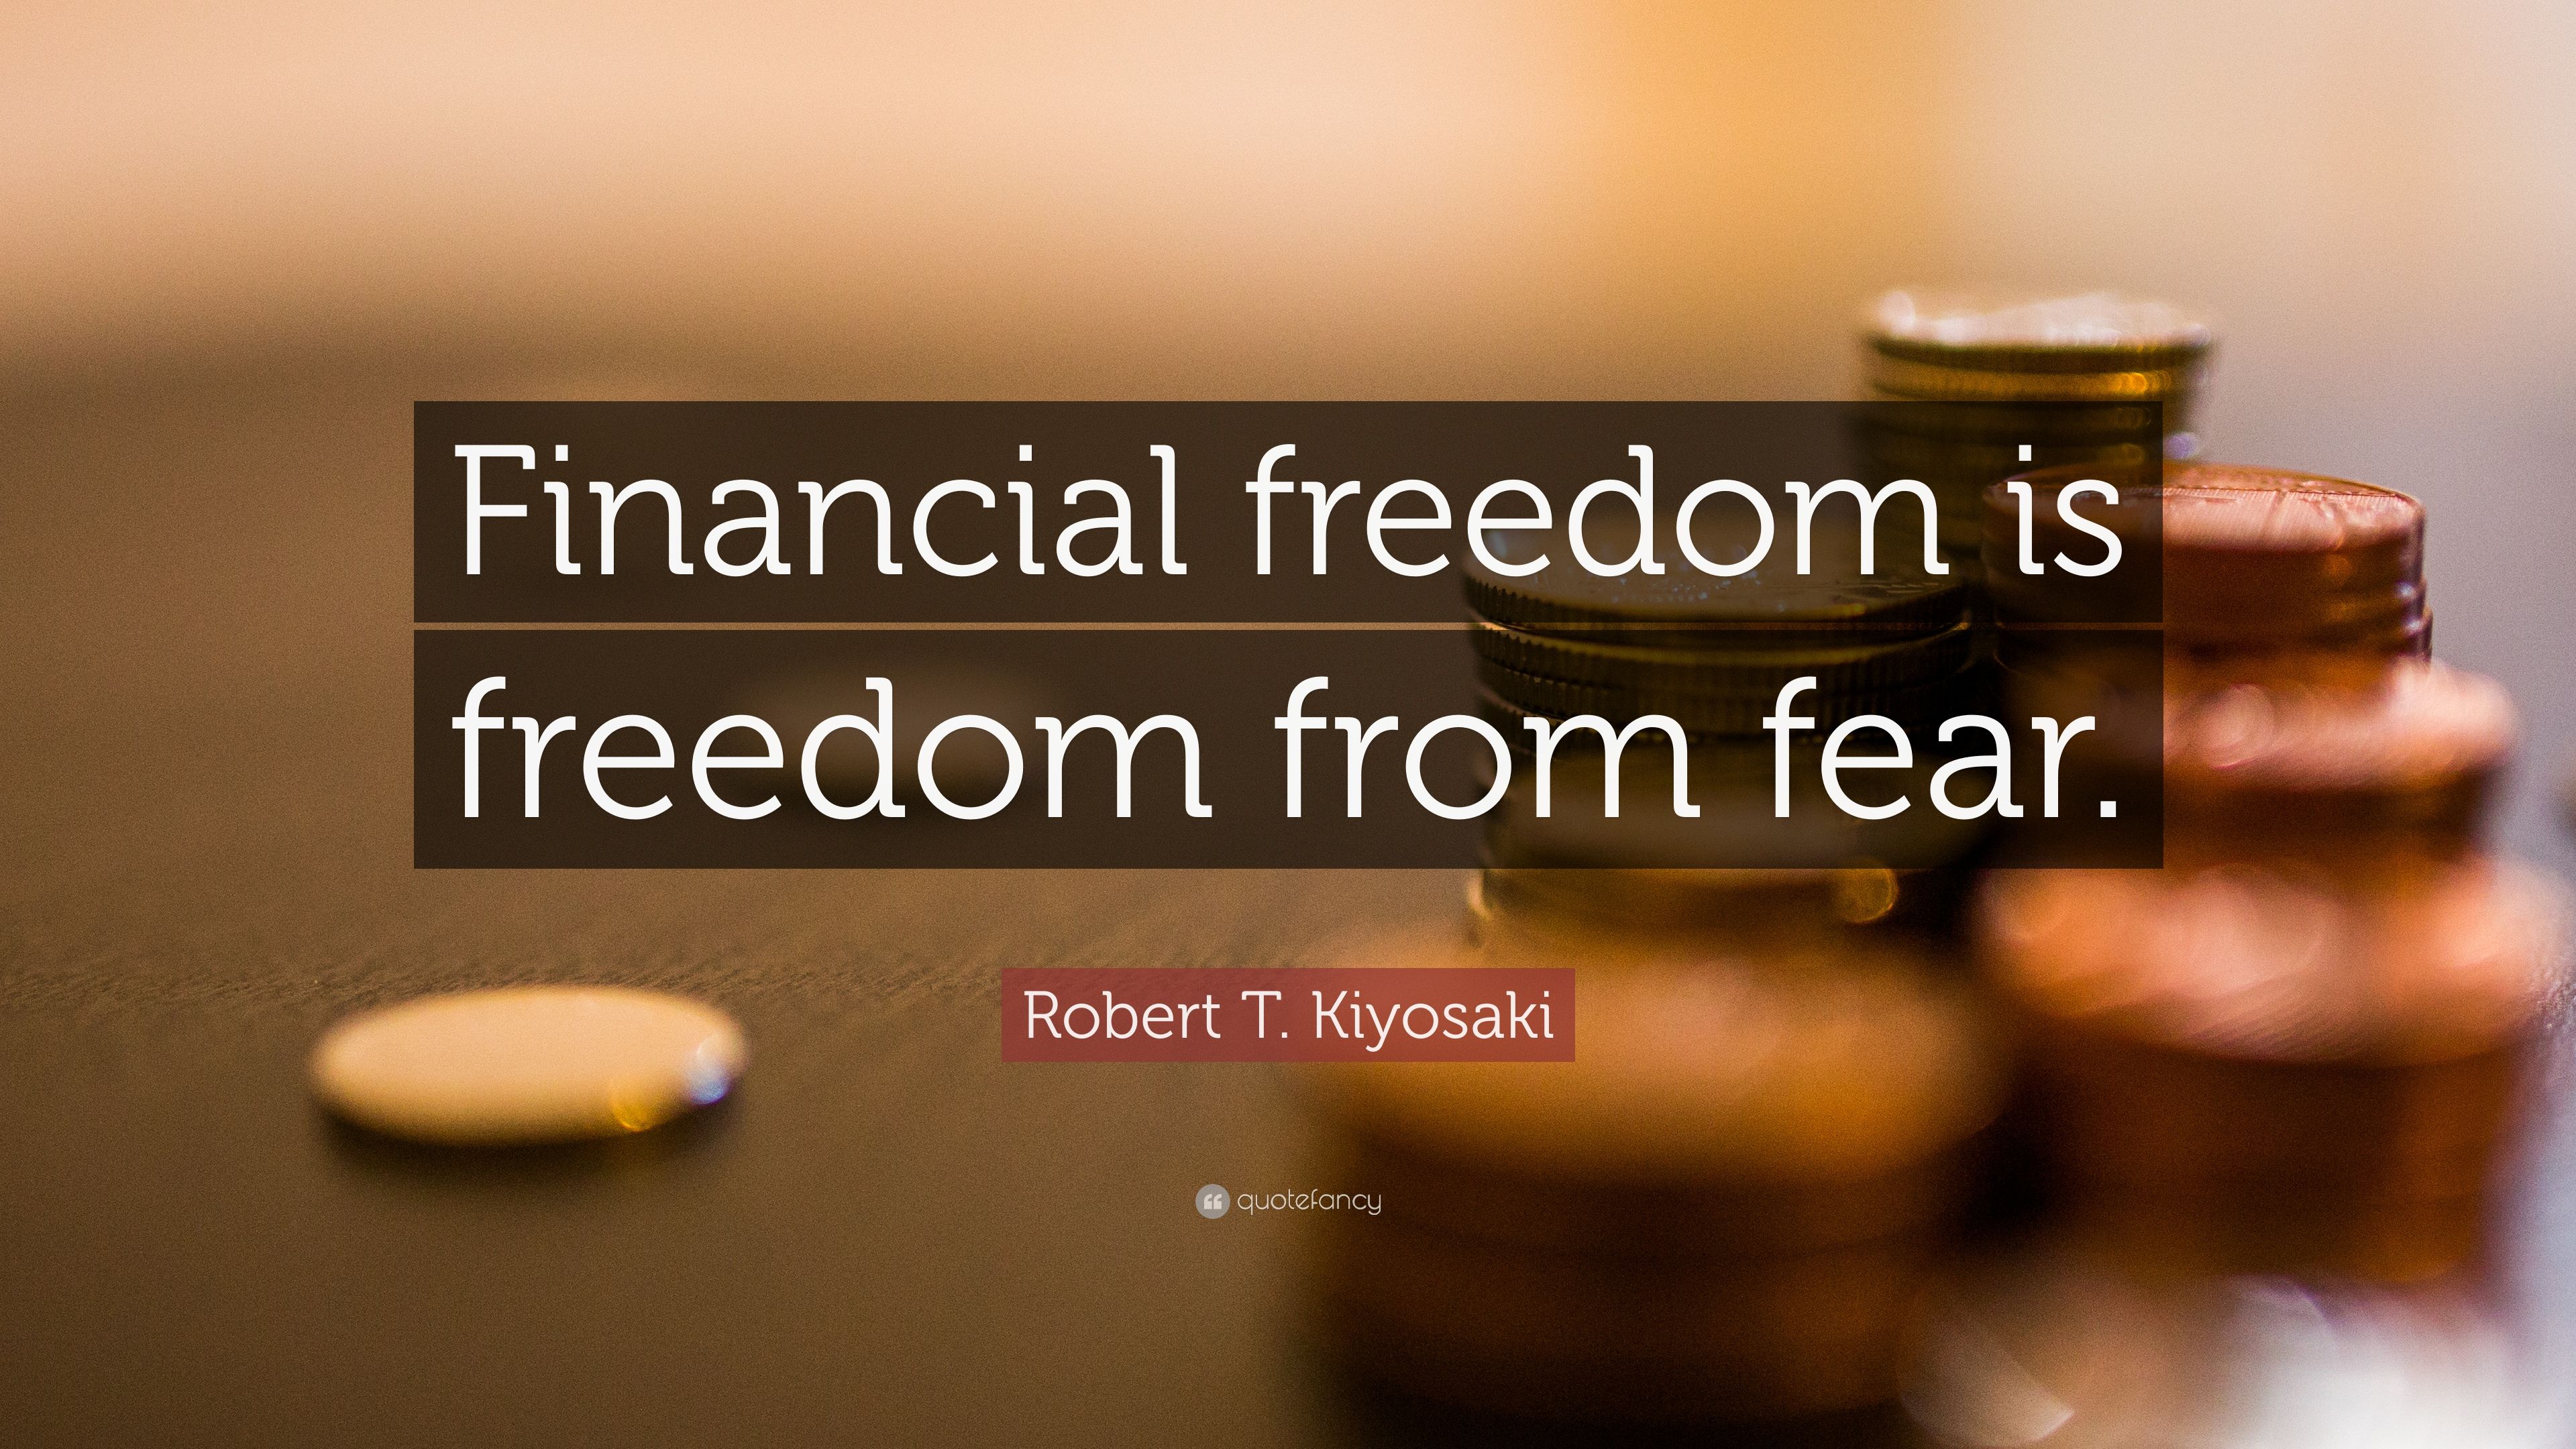 Robert T. Kiyosaki Quote: “Financial freedom is freedom from fear